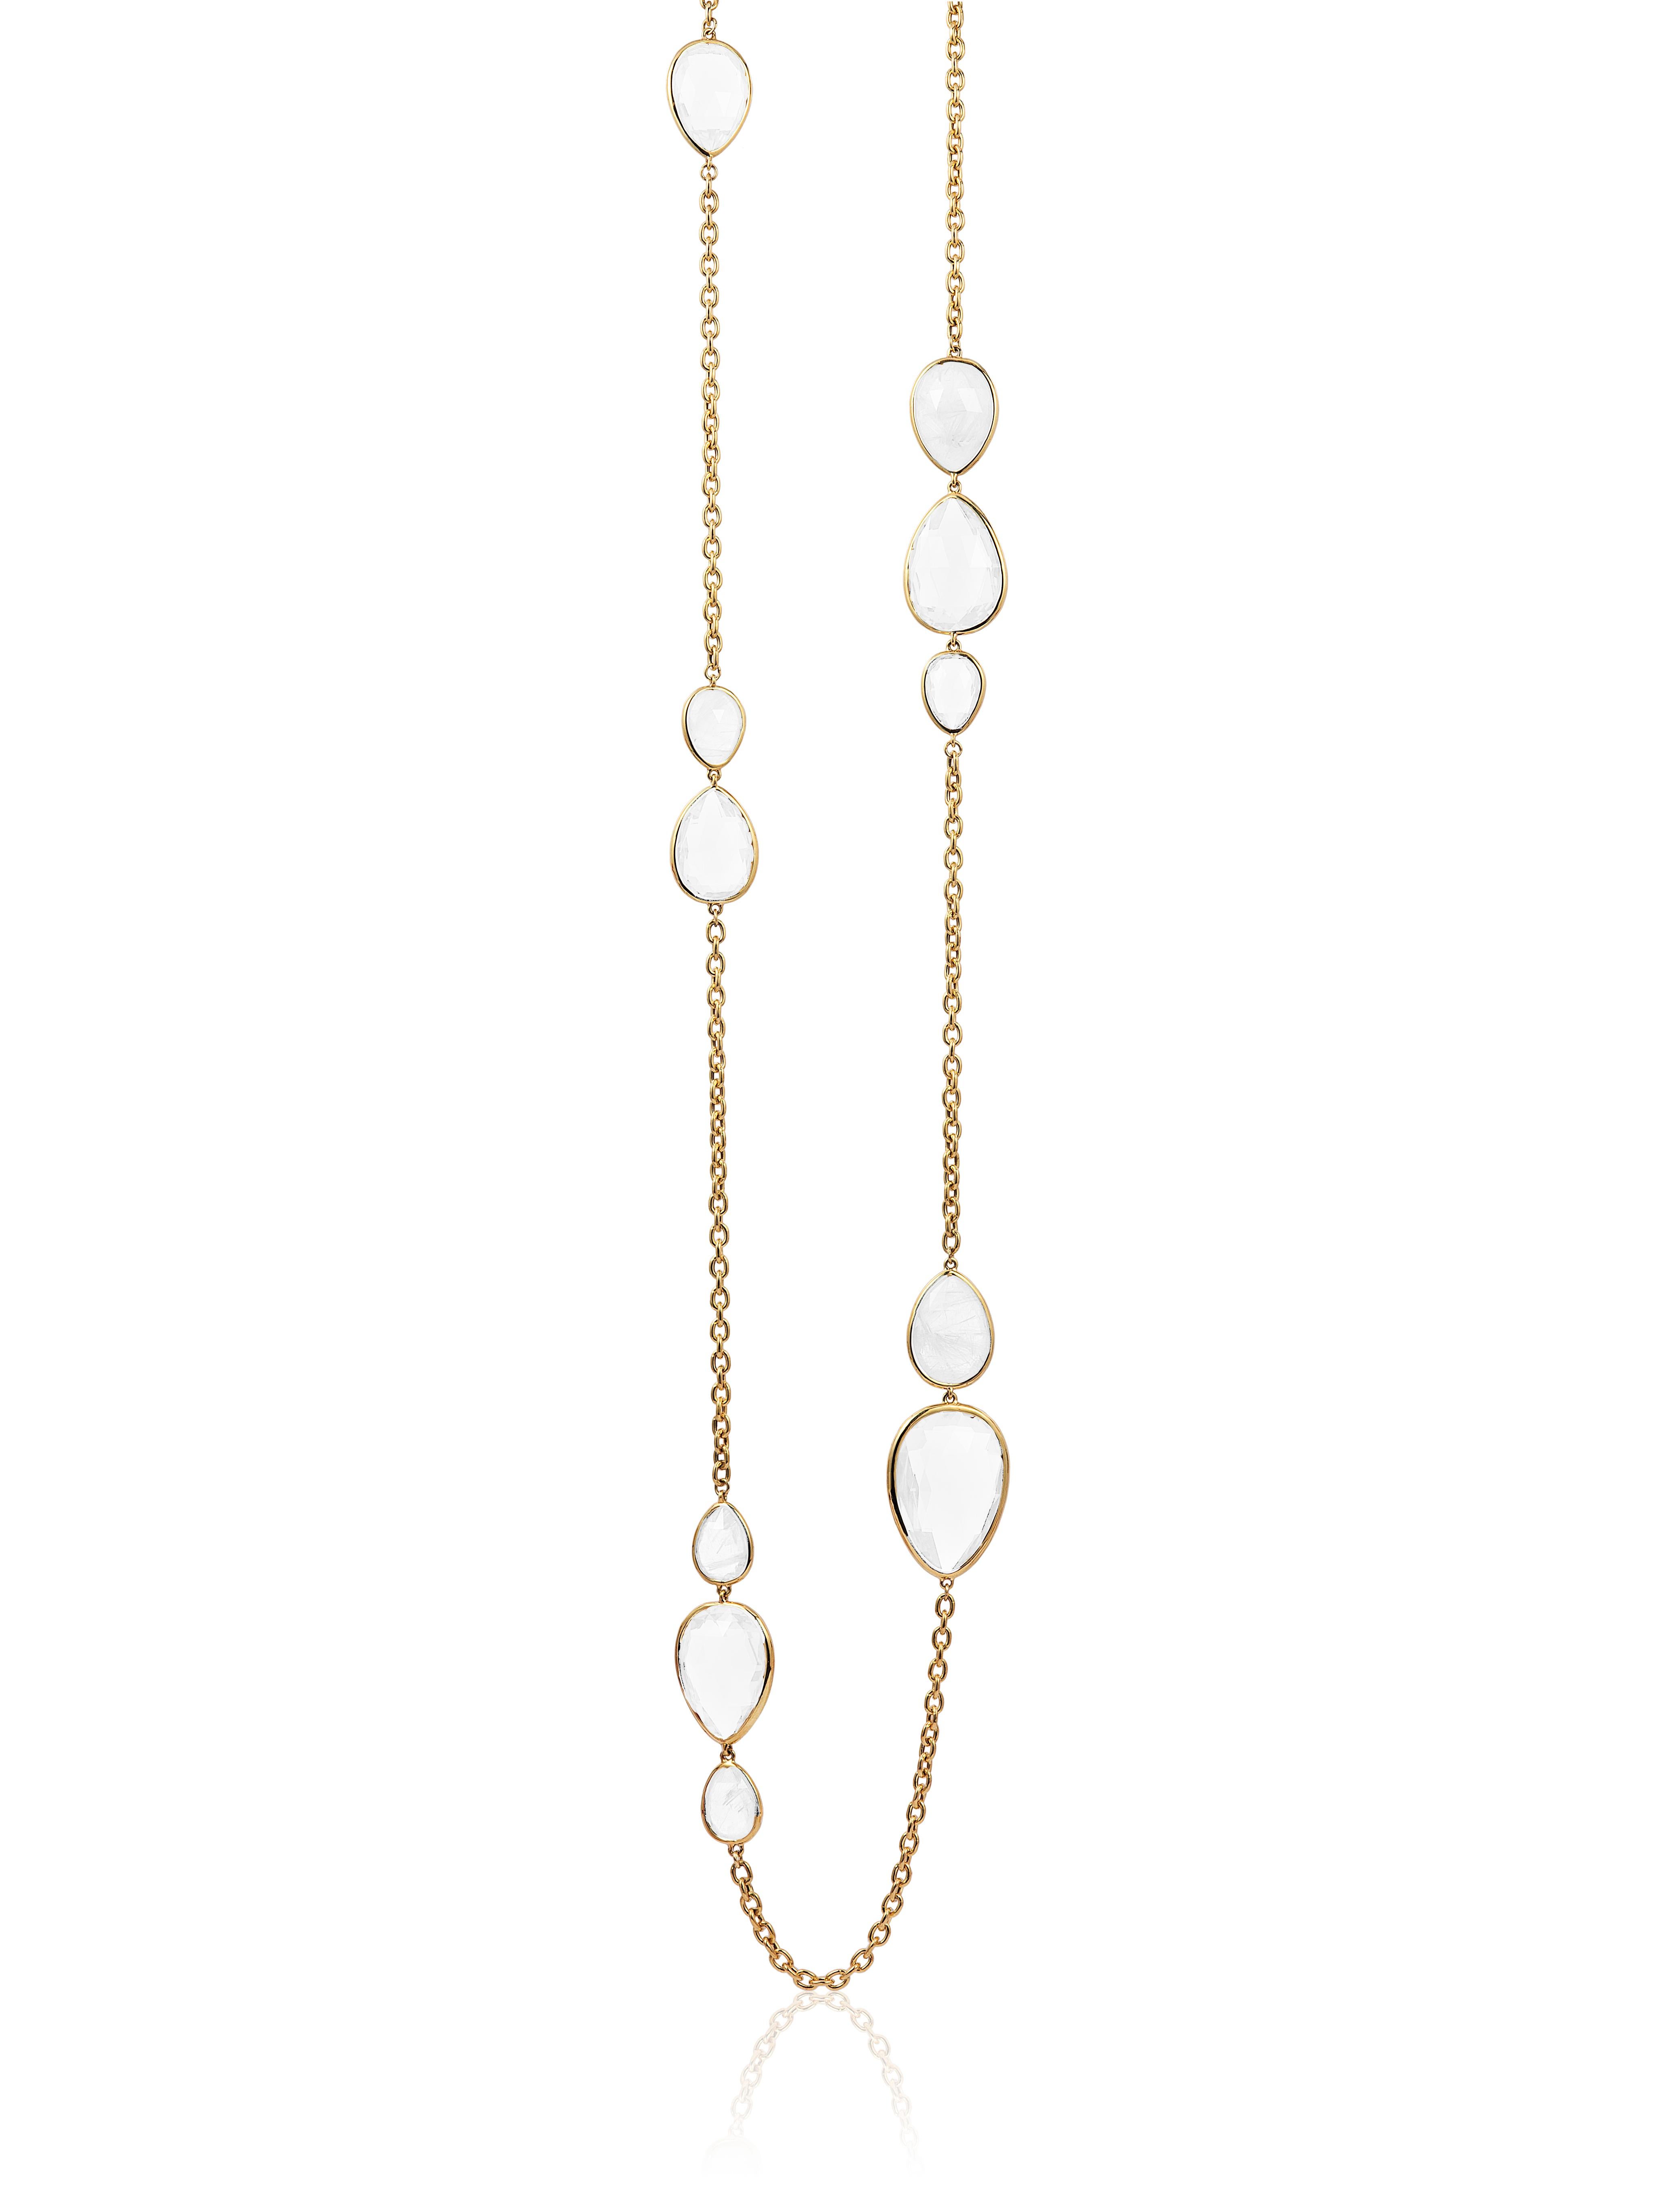 Moon Quartz Pear Shape Briolette Necklace on Oval Link Chain in 18K Yellow Gold, from ‘Gossip’ Collection  
Length: 36